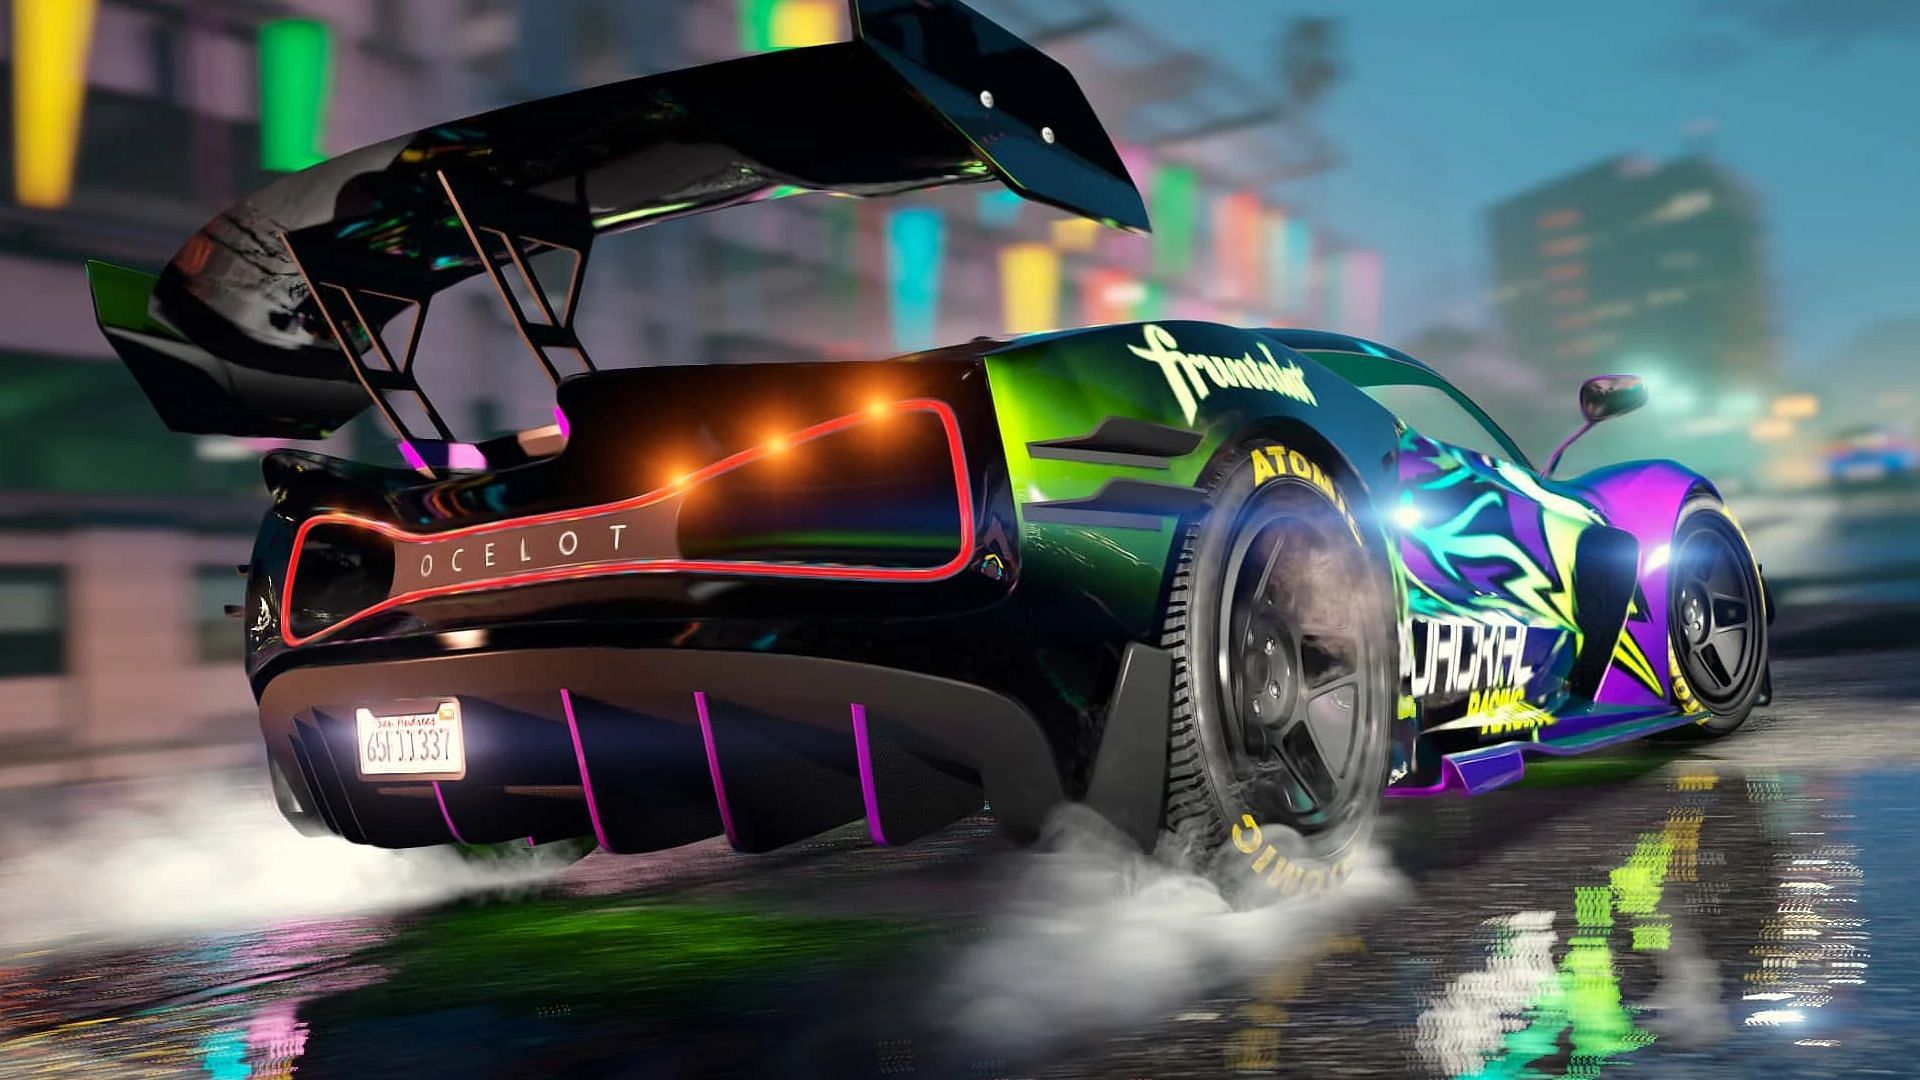 This car can be stylish and perform well, too (Image via Rockstar Games)